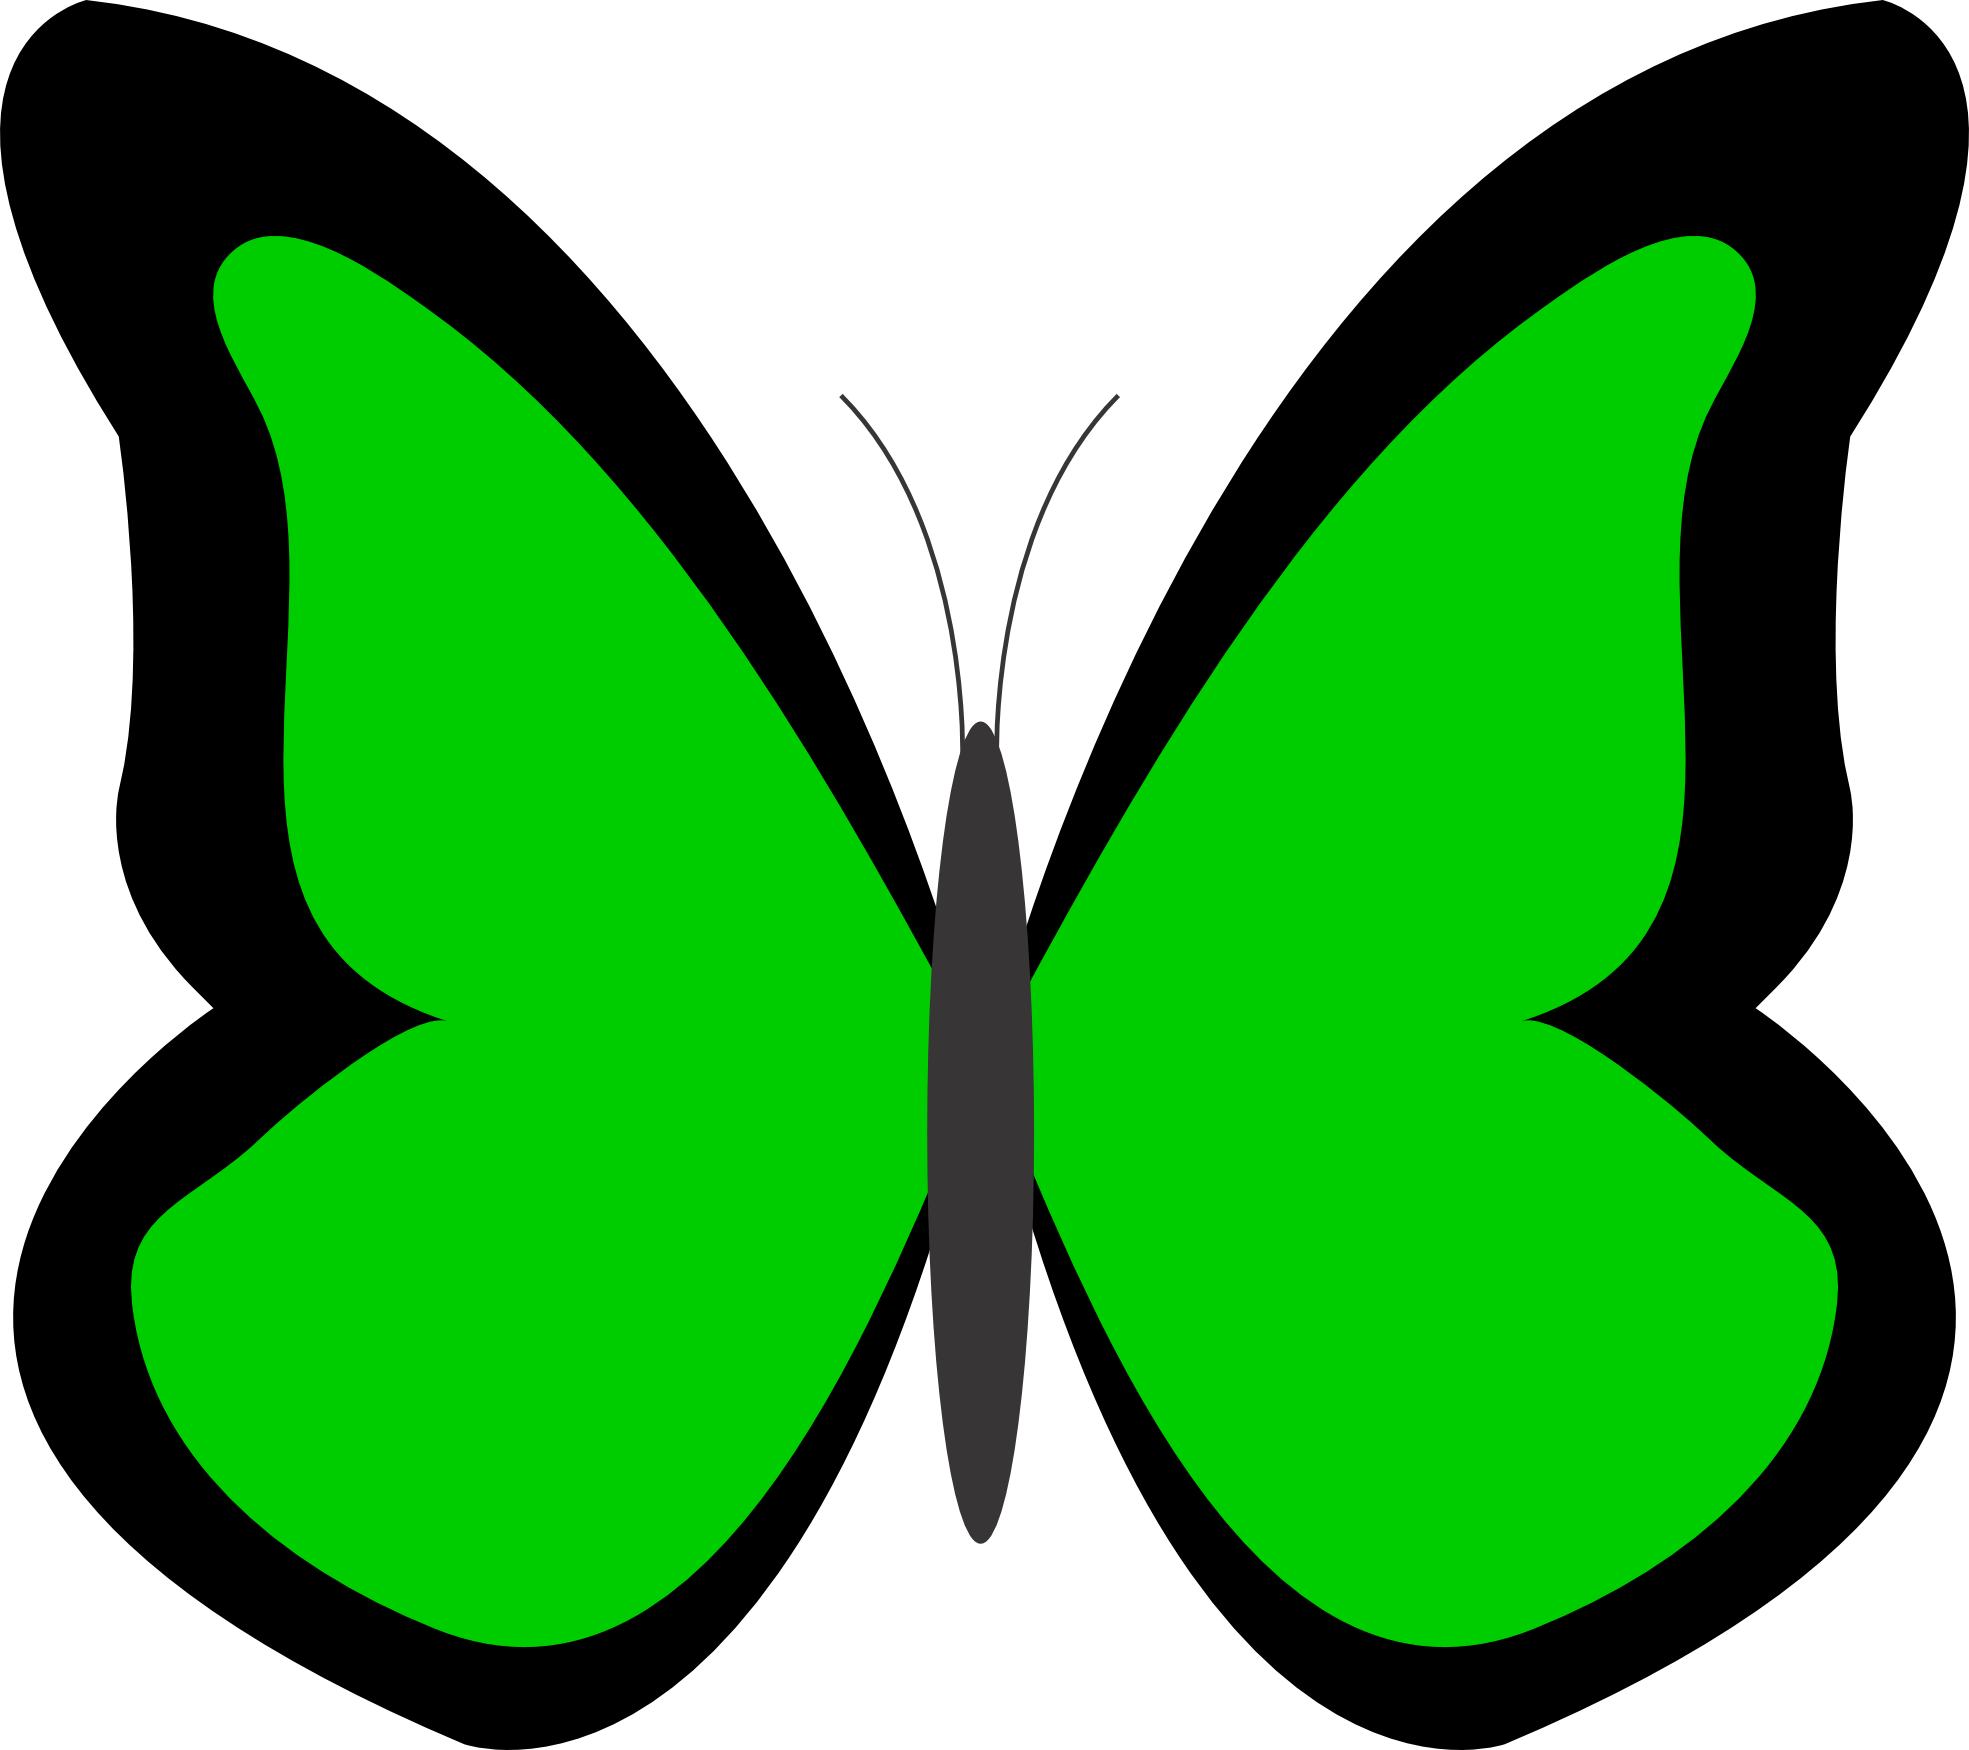 Butterfly 26 Color Colour Green 3 Peace xochi.info SupaRedonkulous ...